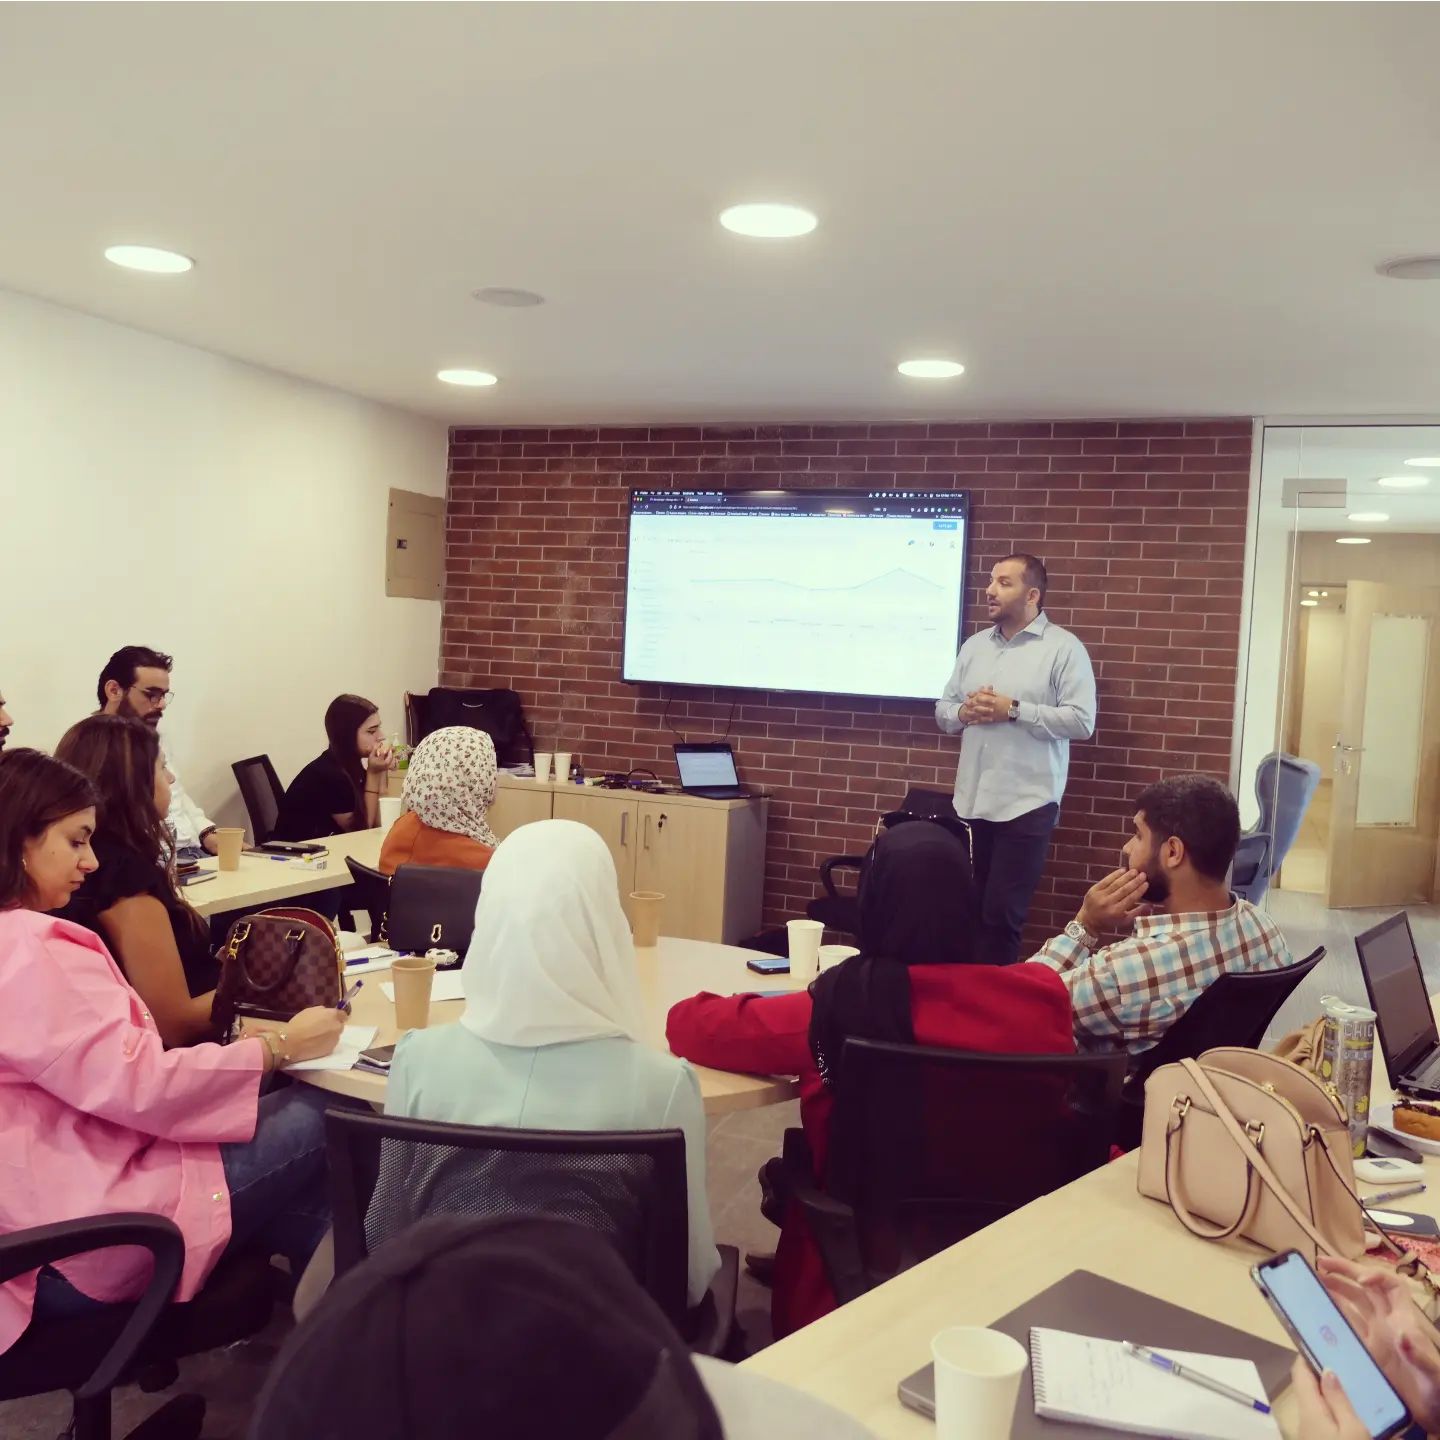 Last week, we completed a 3-day training on advanced #digitalmarketing for inbound tour operators in #Jordan 🇯🇴. This training will help tour operators integrate new travel experiences into their offers online and target worldwide holidaymakers, adventurers, and solo travellers through paid ads on social media and search engines 📈  The capacity building of tour operators comes as part of our Curated Experiences project, funded by @nlinjo , to promote experiential, #sustainabletourism in Jordan 🧳🥘🧗‍♂️  #tourismvaluchain #travelexperiences #adventuretourism #culturalimmersion #wellnesstourism